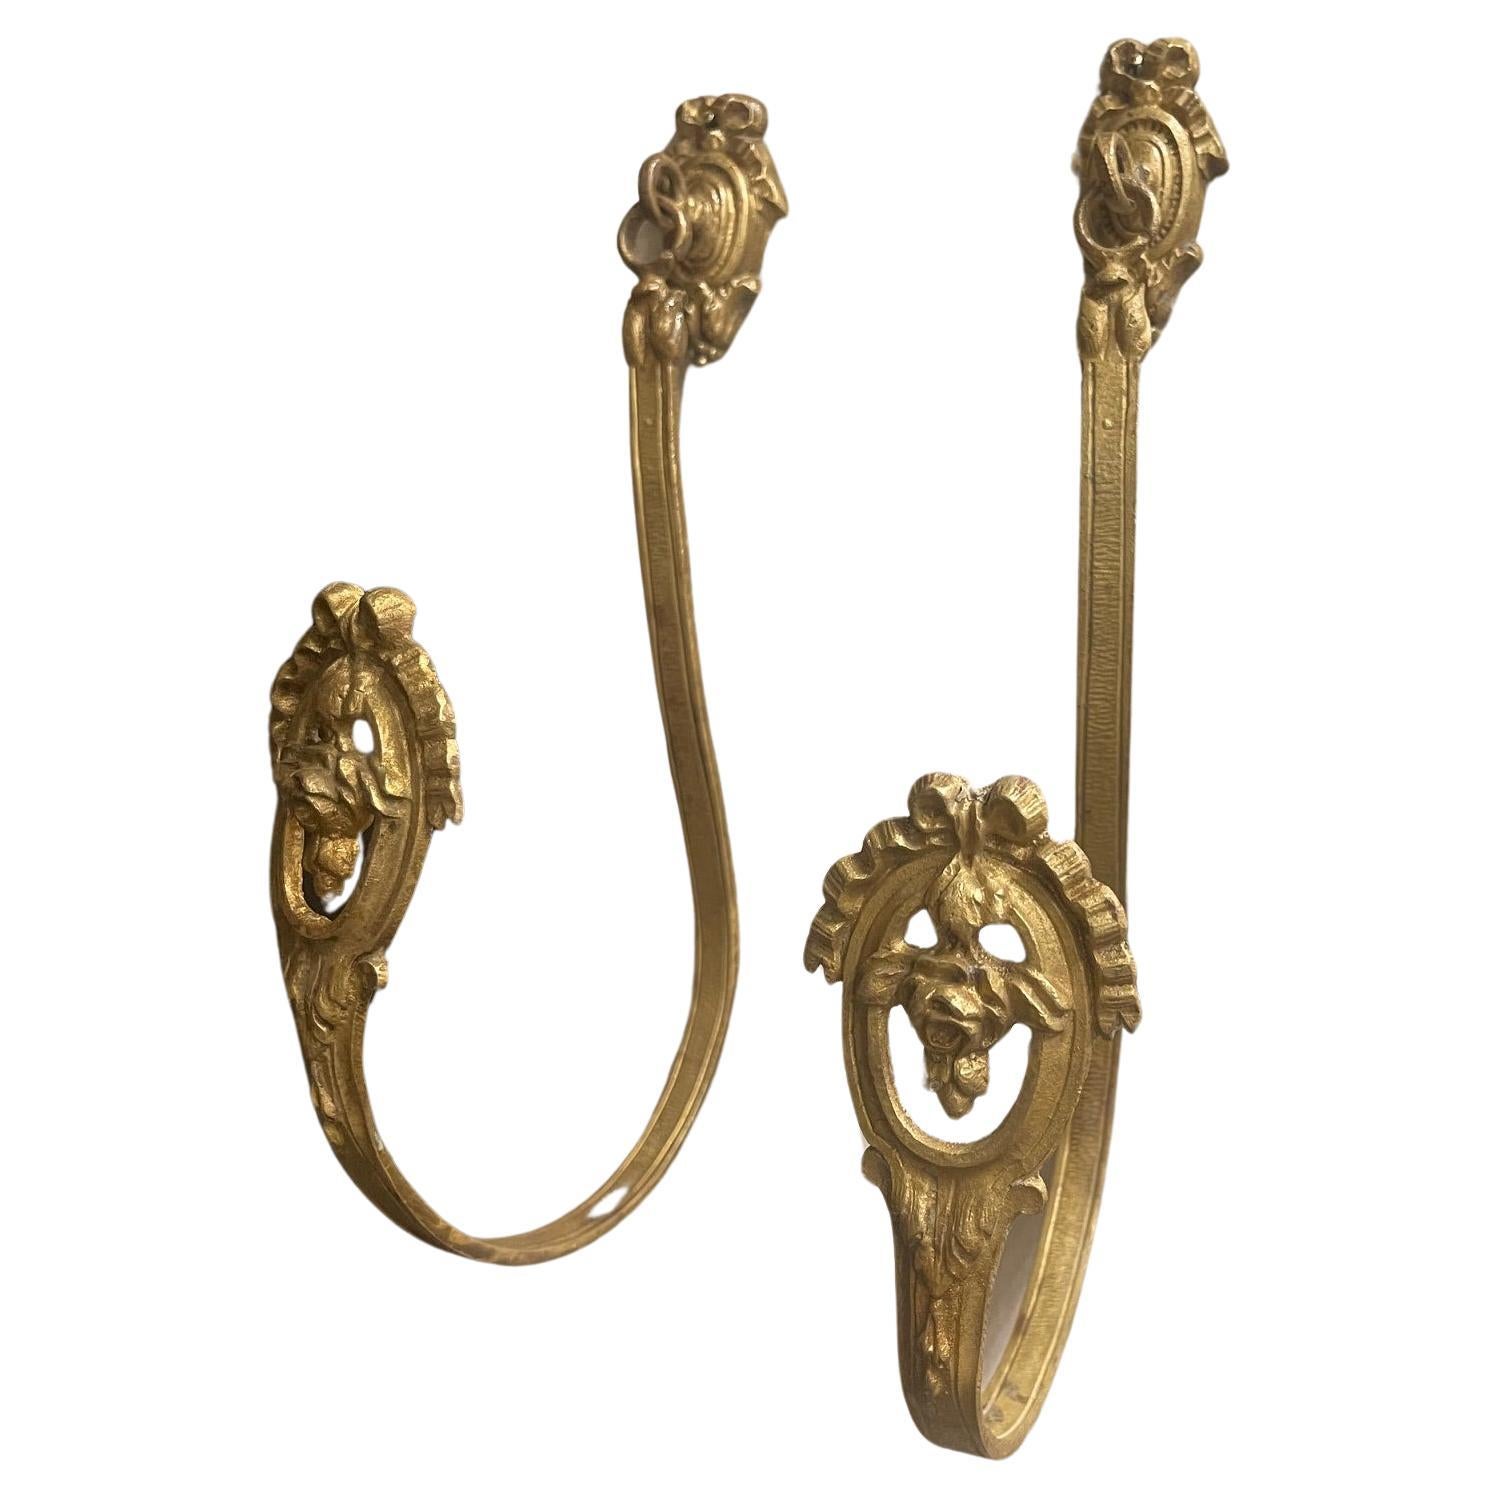 Pair of French Bronze and Brass Curtain Tiebacks or Curtain Holder, 19th Century For Sale